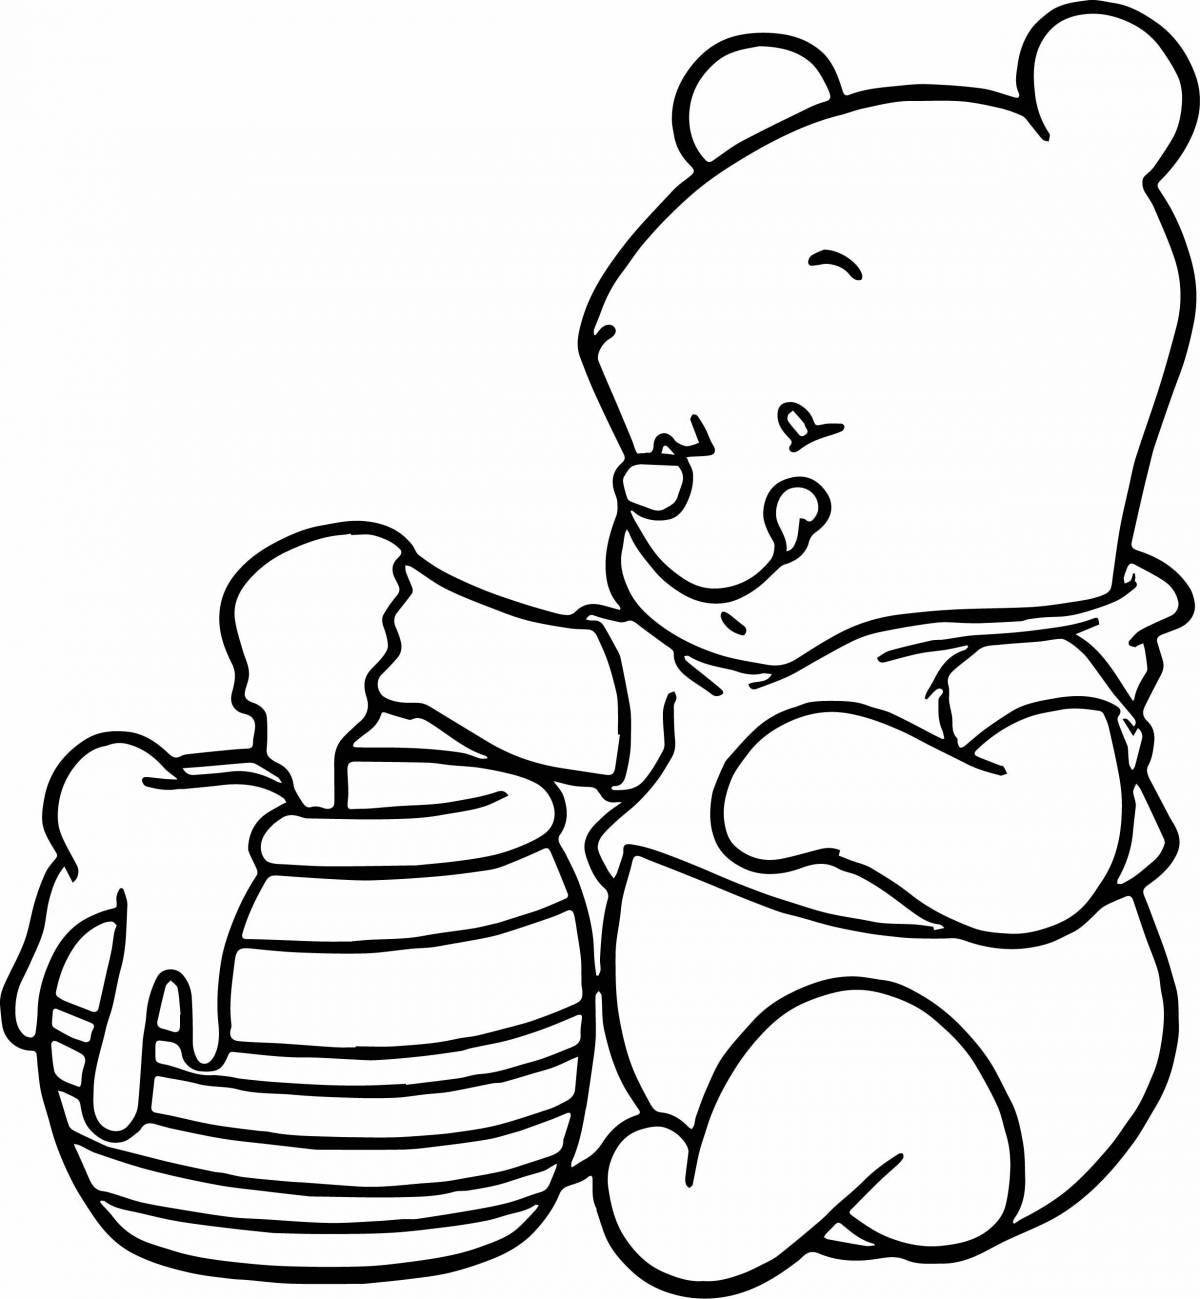 Invitation bear with honey coloring book